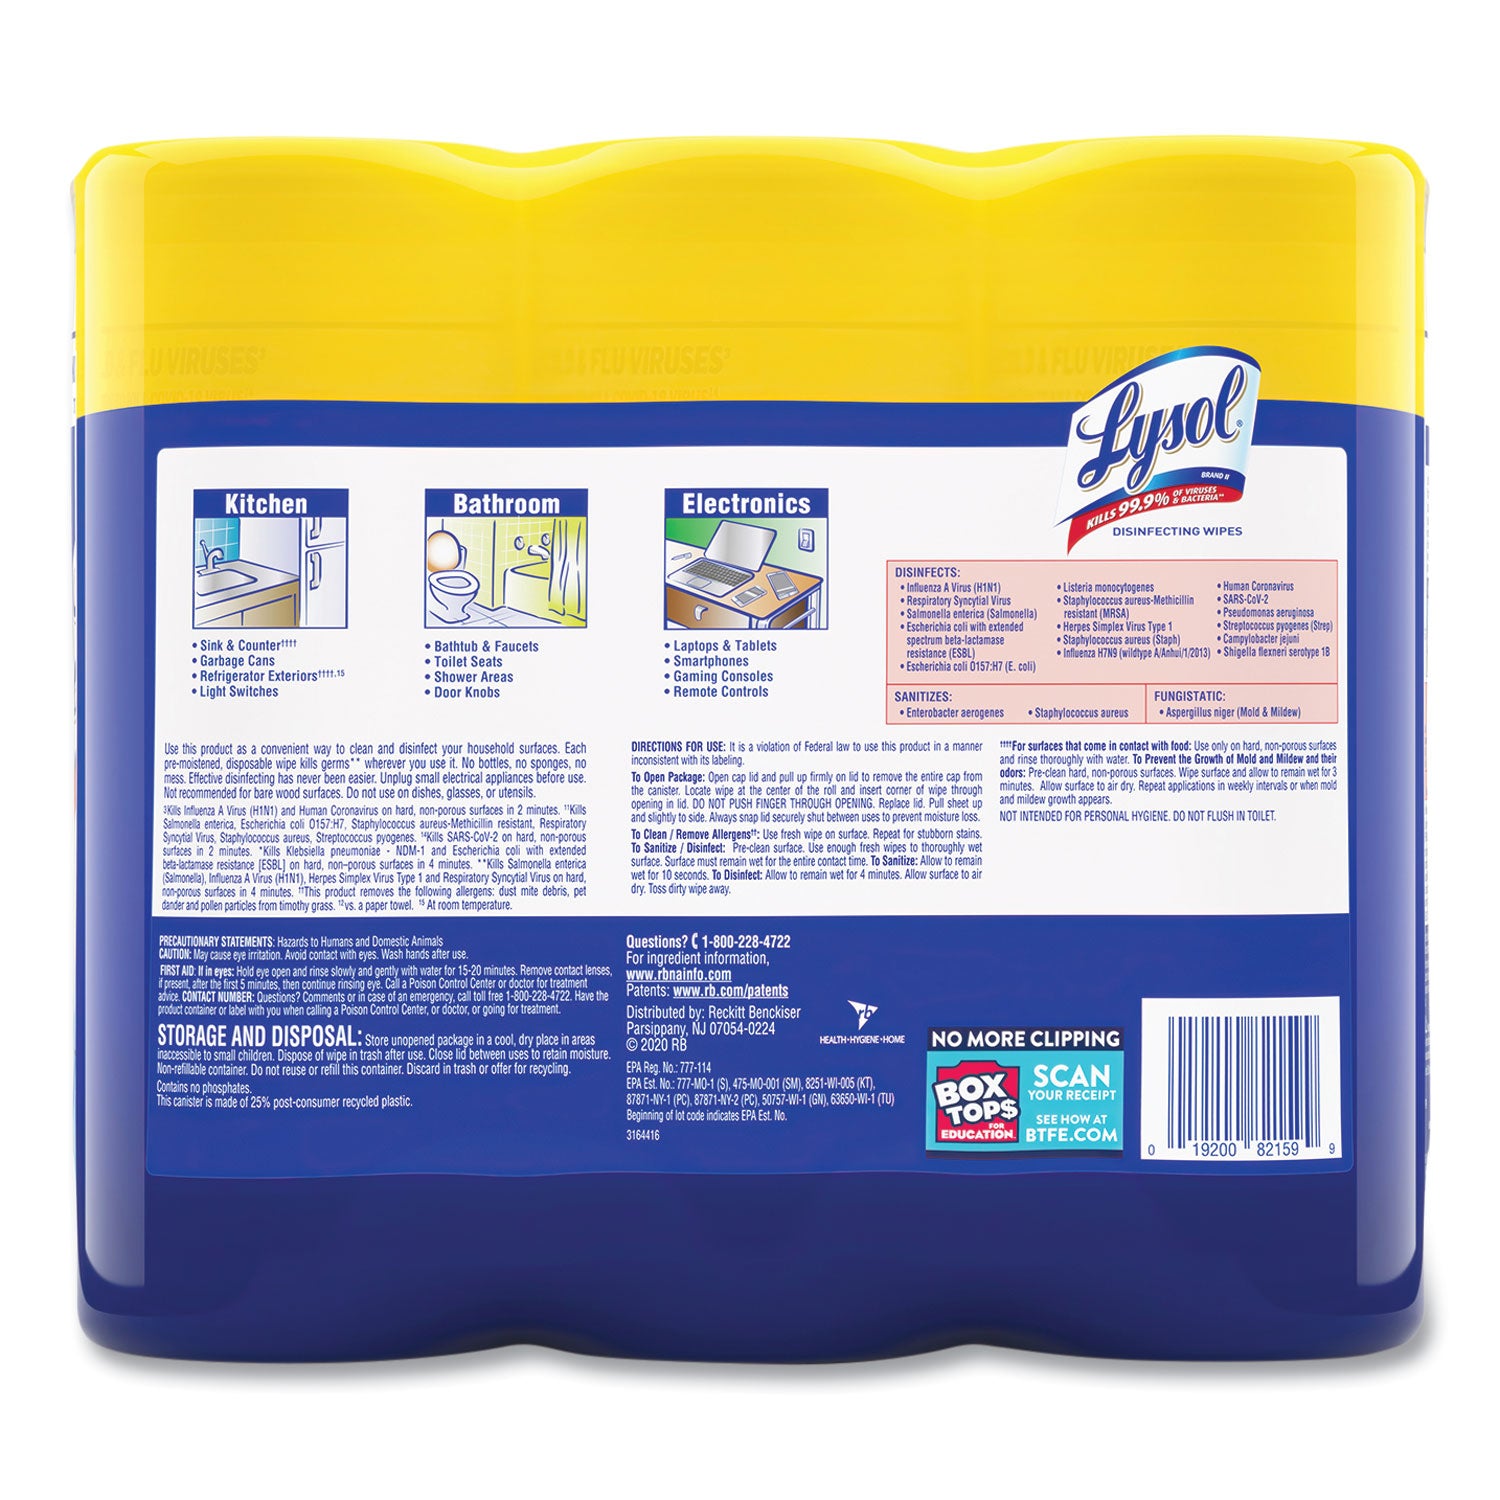 disinfecting-wipes-1-ply-7-x-725-lemon-and-lime-blossom-white-35-wipes-canister-3-canisters-pack_rac82159pk - 5